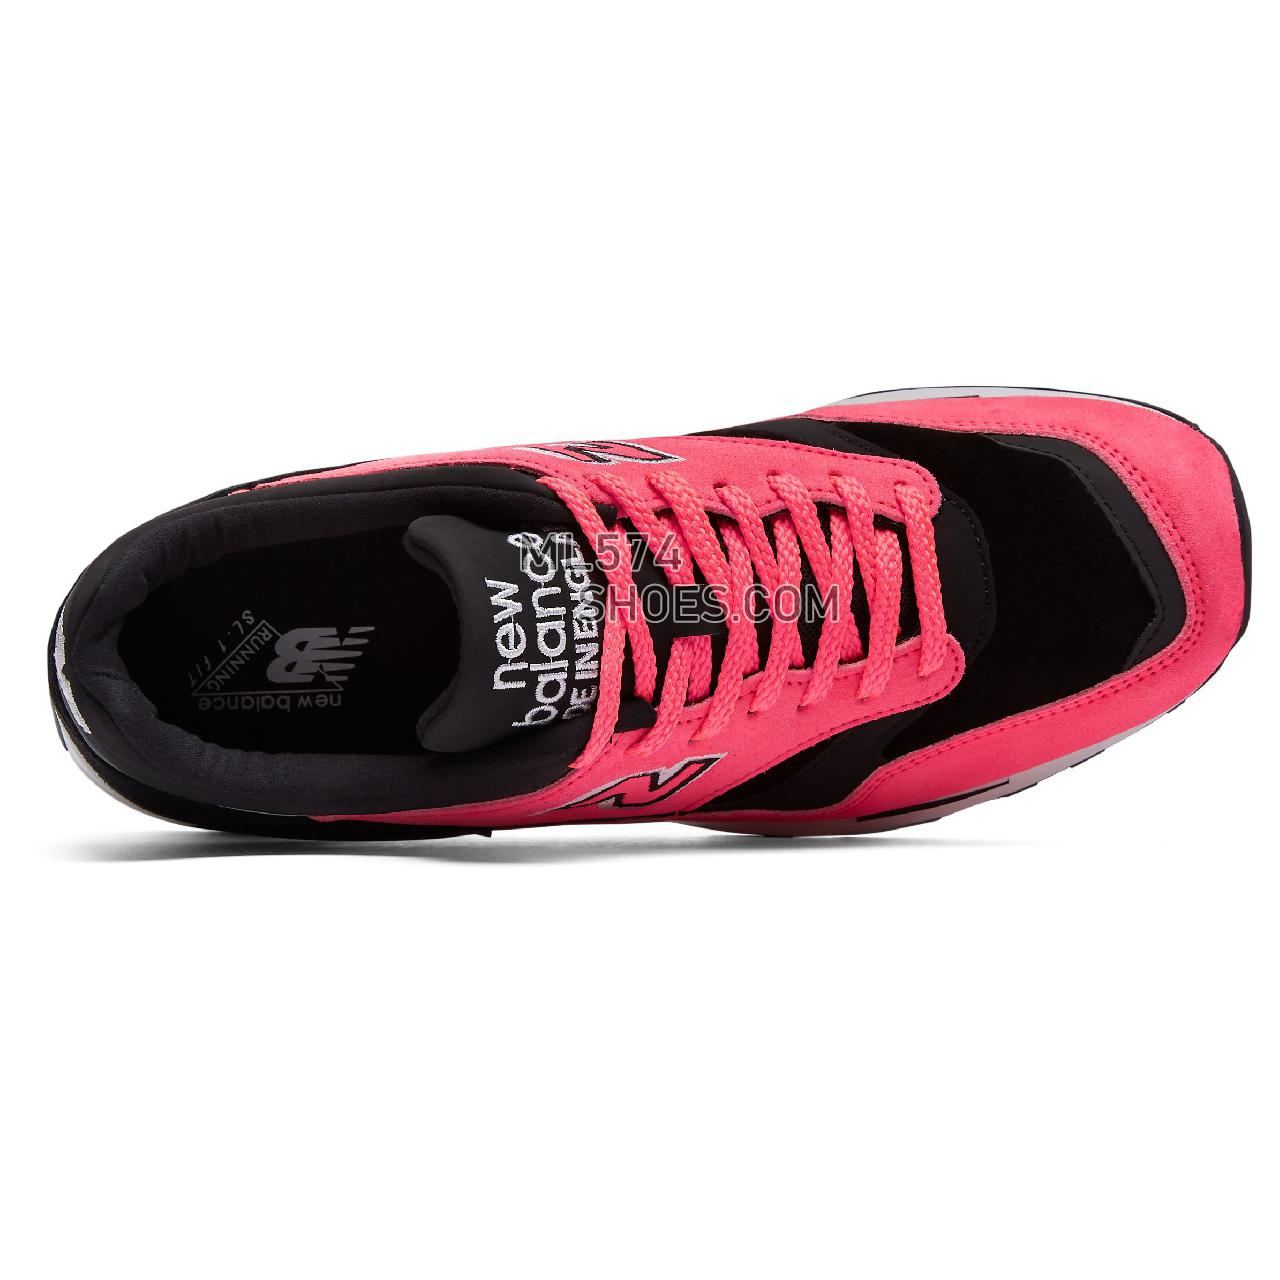 New Balance Made in UK 1500 - Men's 1500 Made in UK Classic - Pink with Black and White - M1500NEN